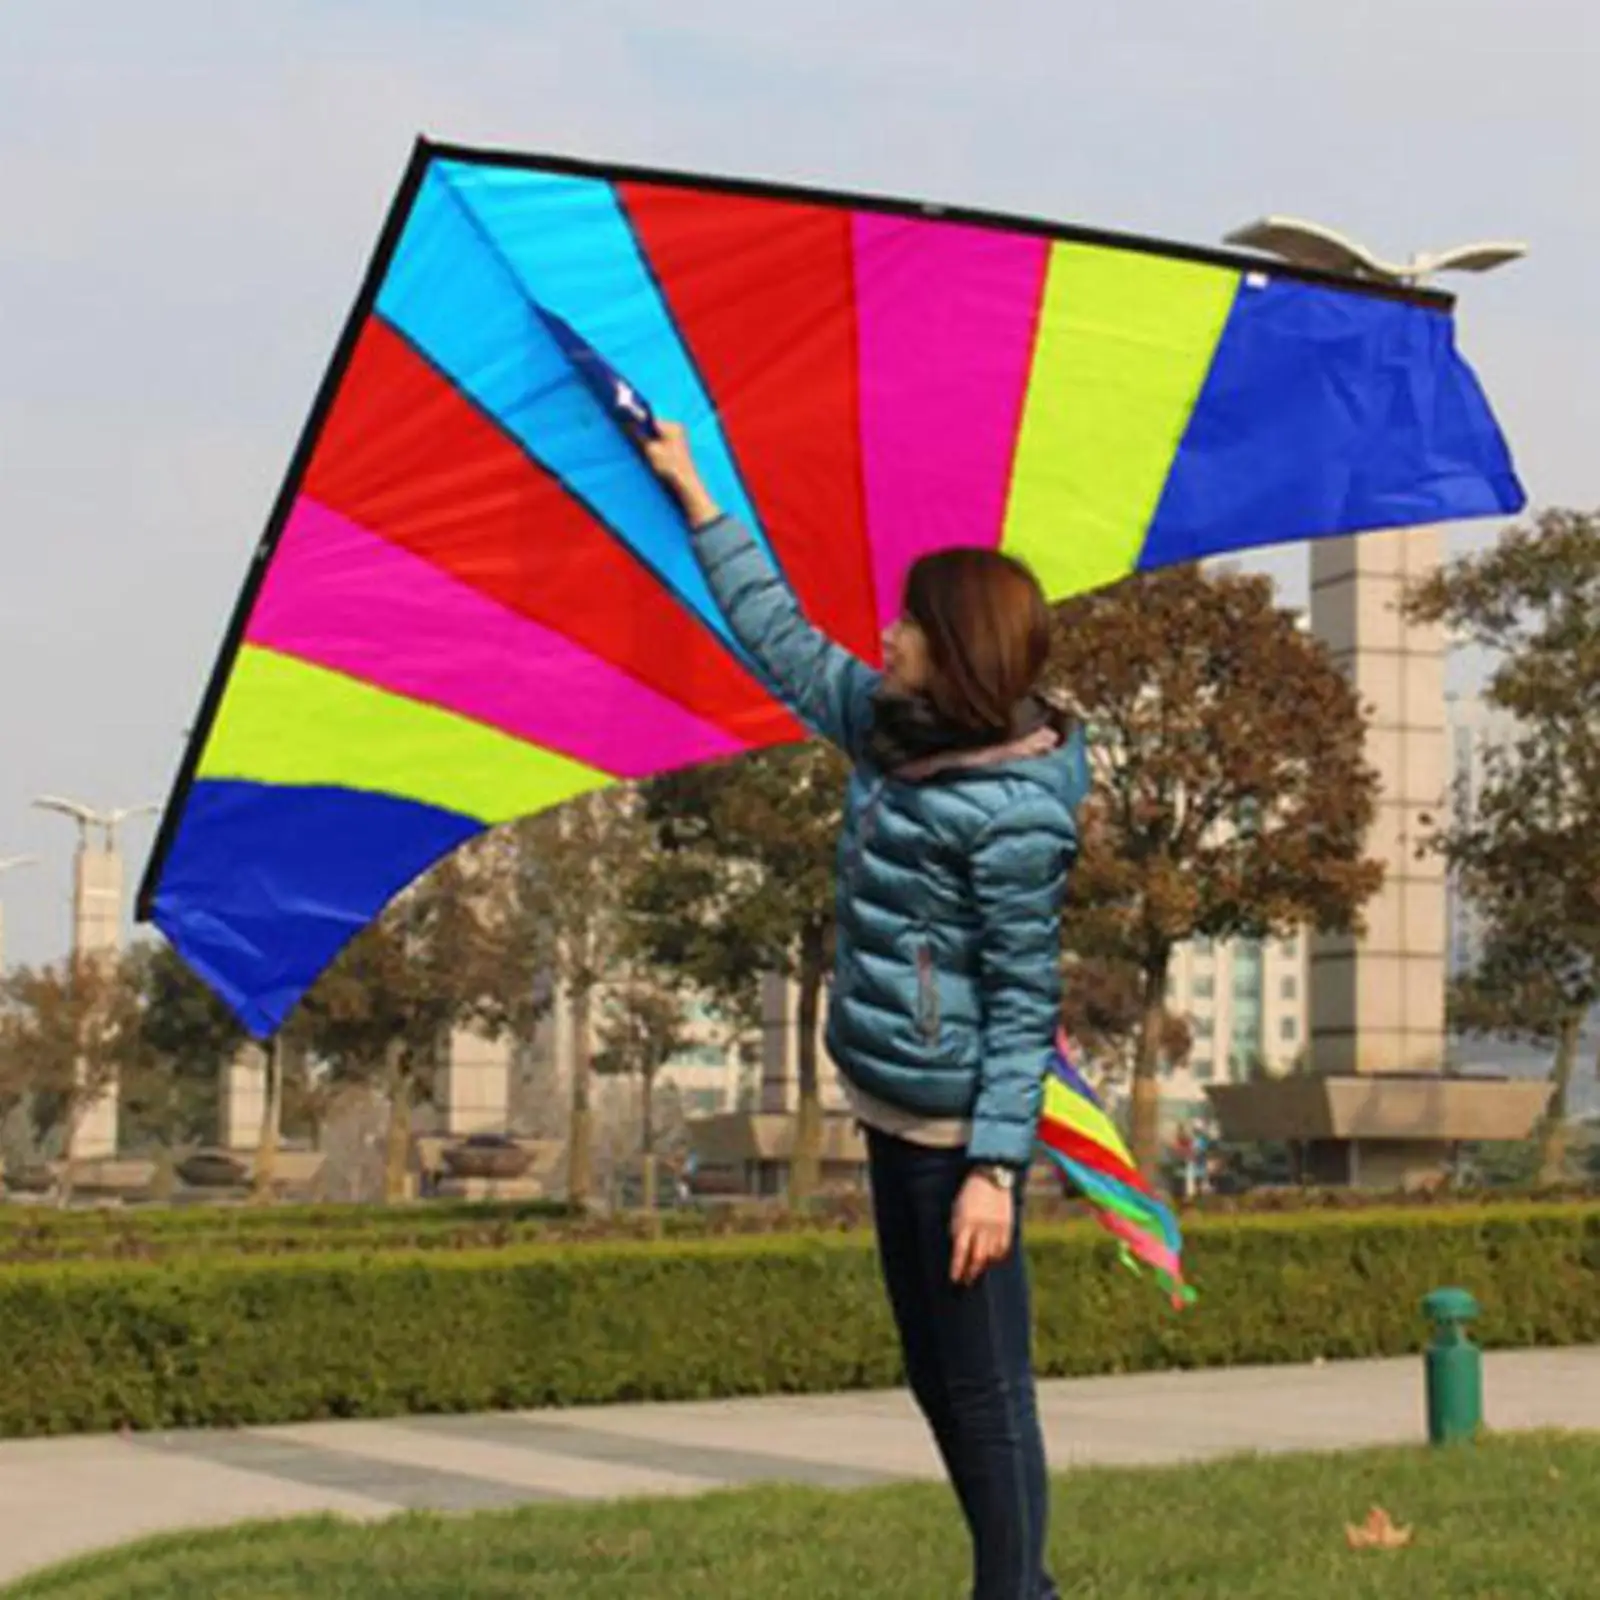 Colorful Delta Kite with Tail Huge Triangle Kite Single for Family Trips Activities Kids Adults